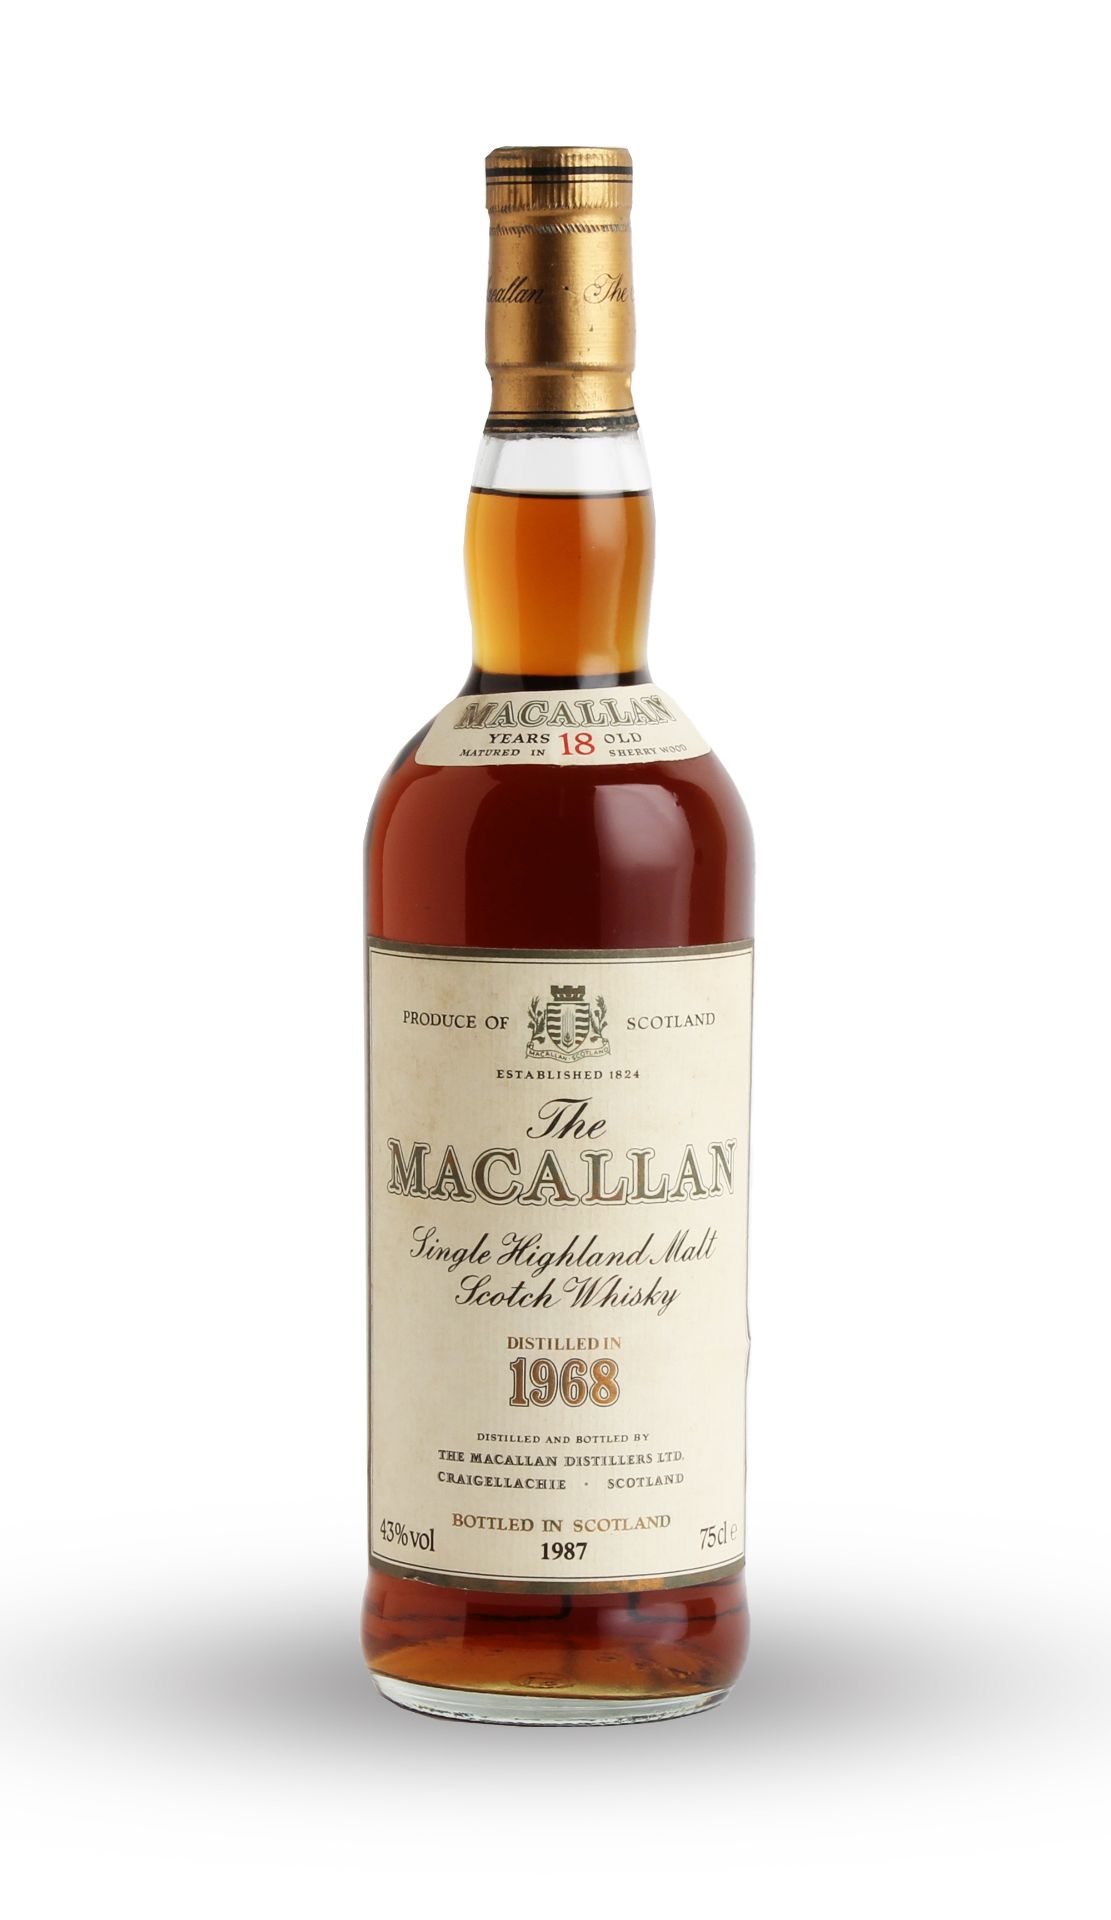 The Macallan-18 year old-1968